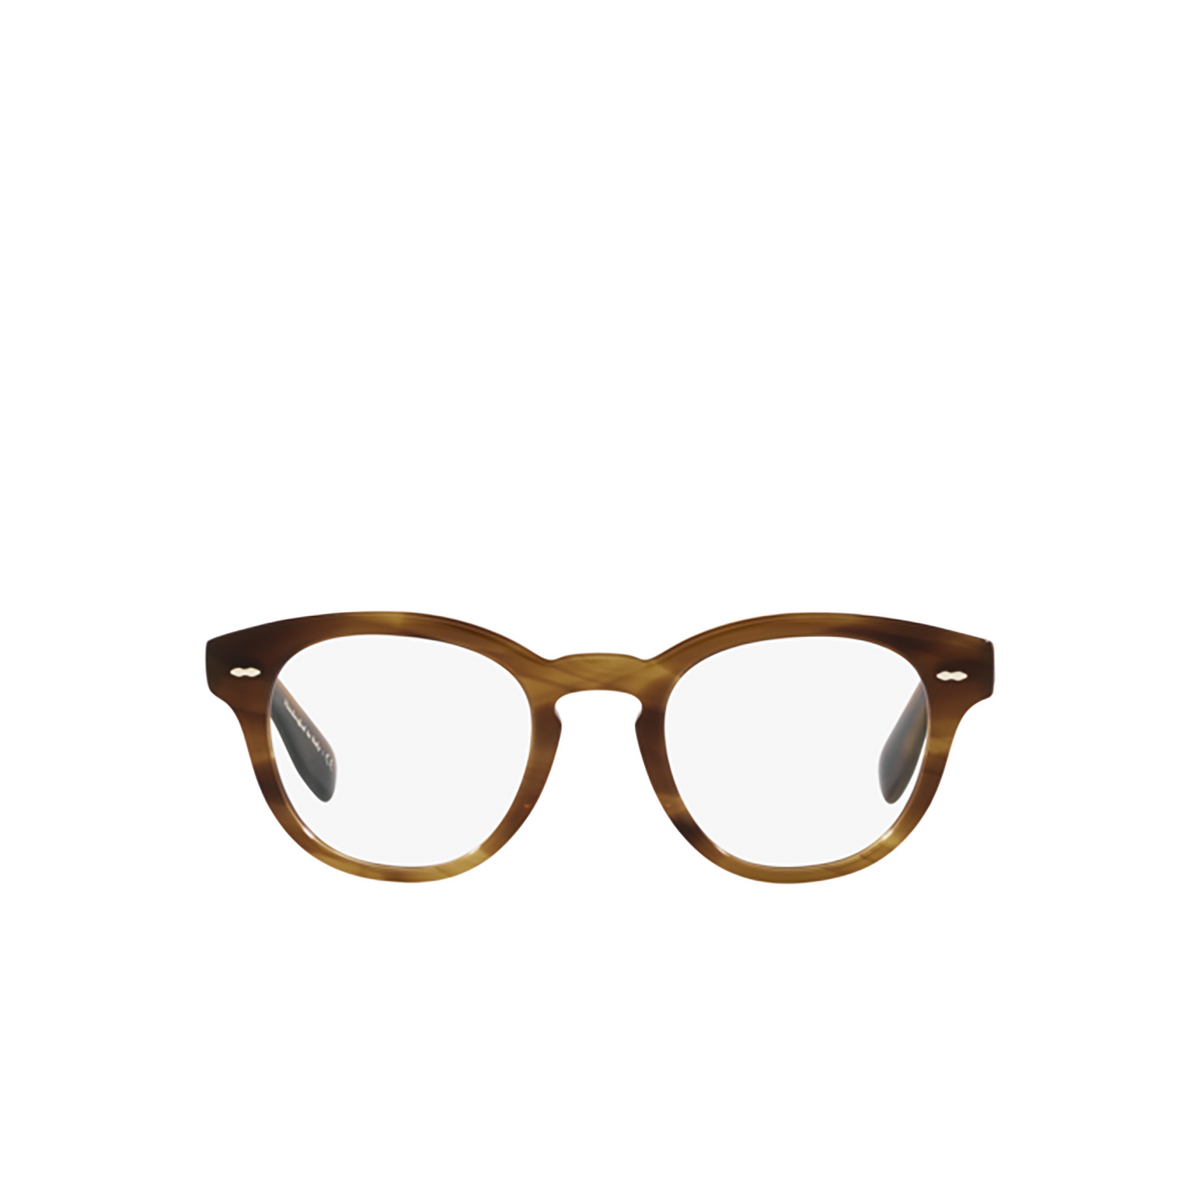 Oliver Peoples CARY GRANT Eyeglasses 1011 Raintree - front view